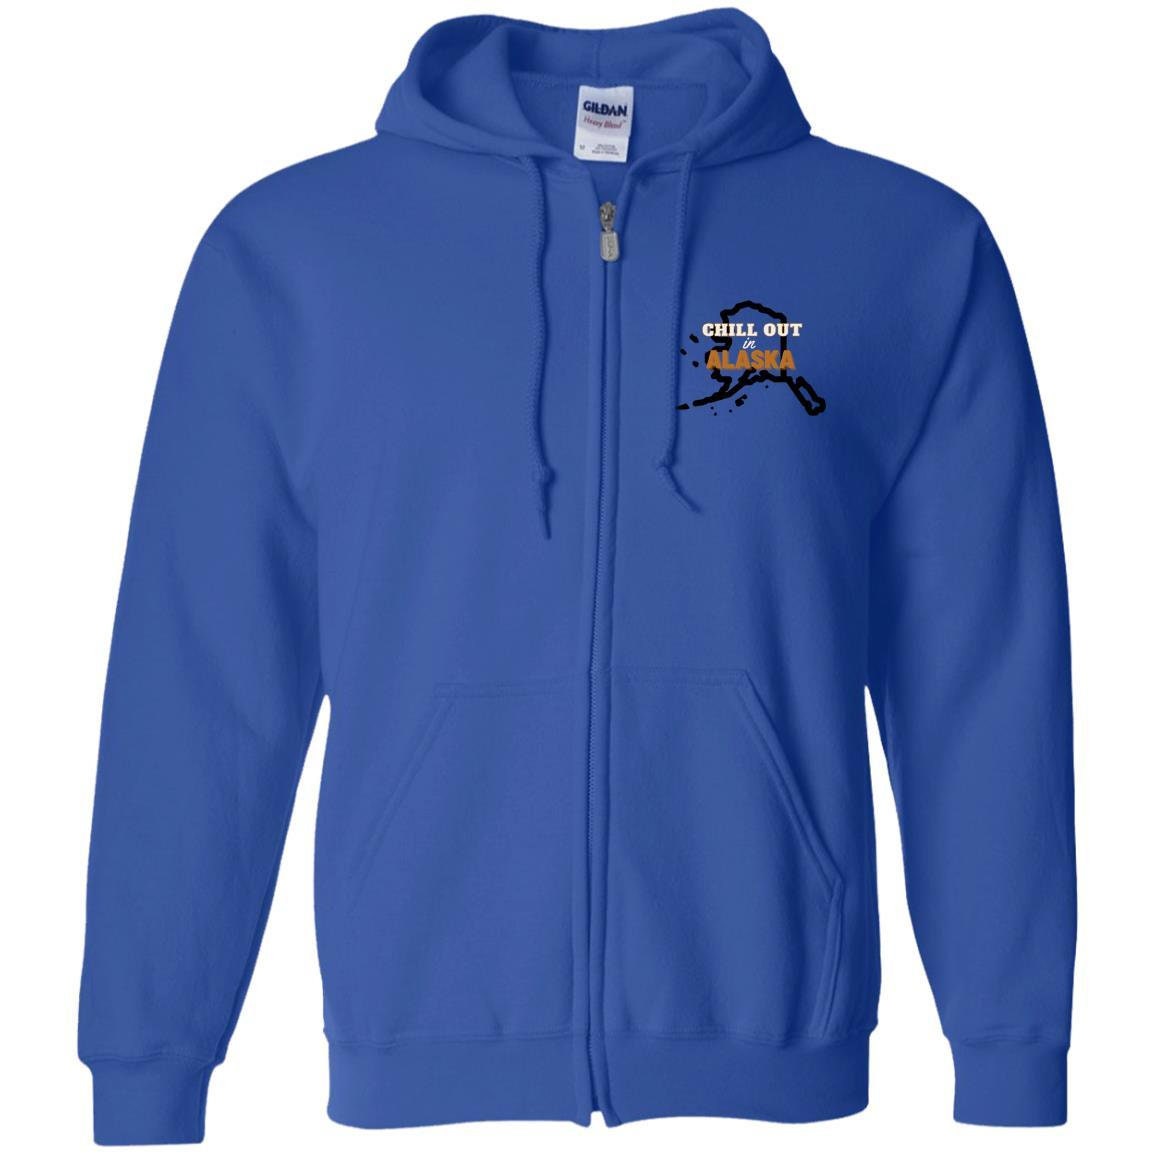 Alaska State Zip Up Hooded Sweatshirt | Alaska State Clothing | GIFTS FOR HIM or her